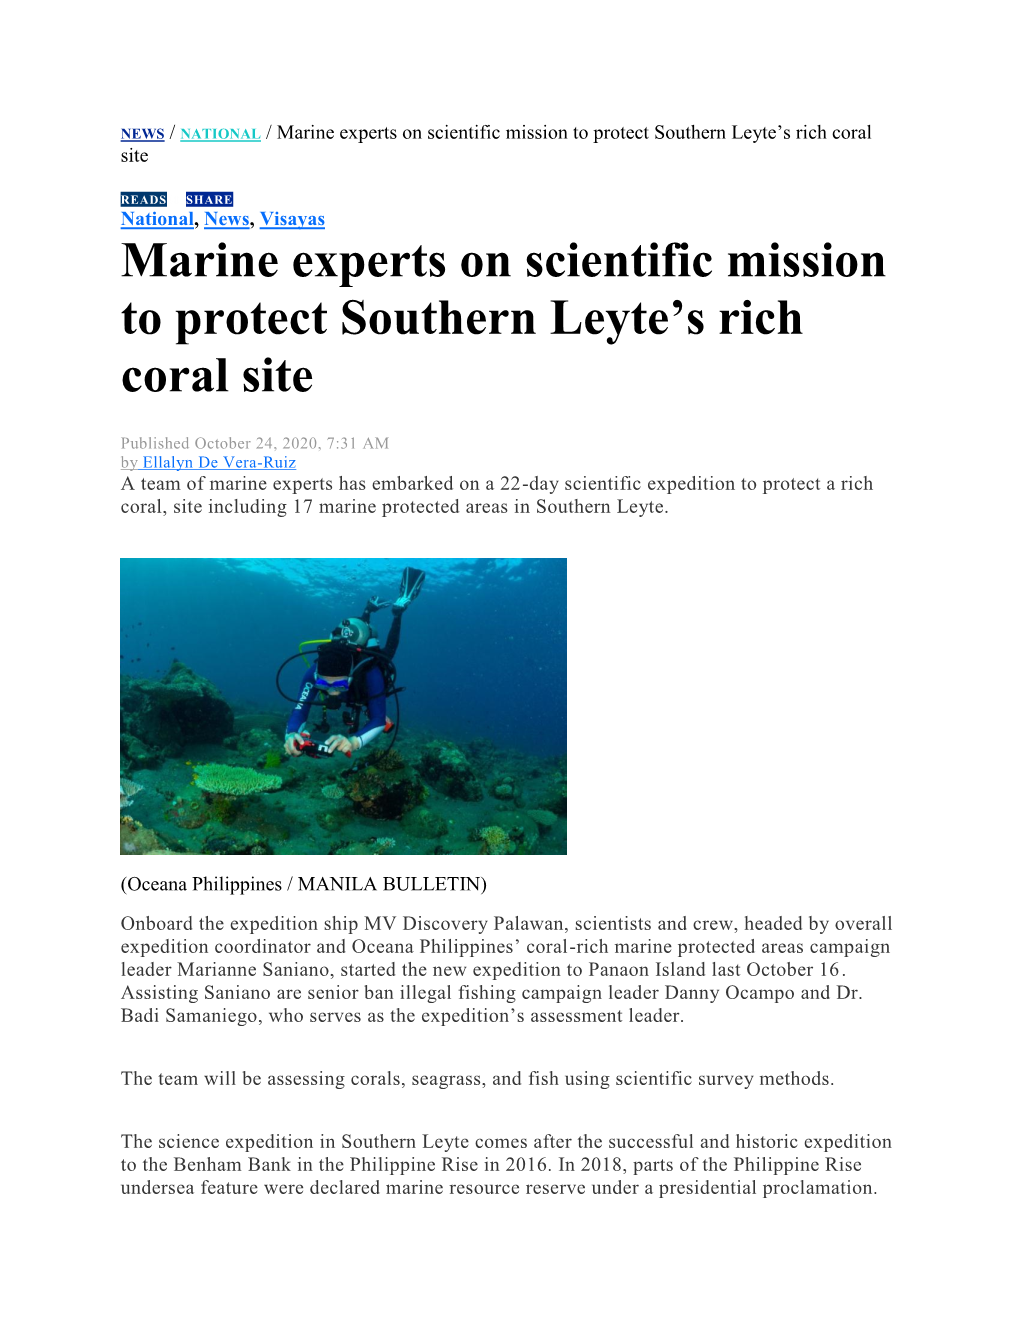 Marine Experts on Scientific Mission to Protect Southern Leyte's Rich Coral Site